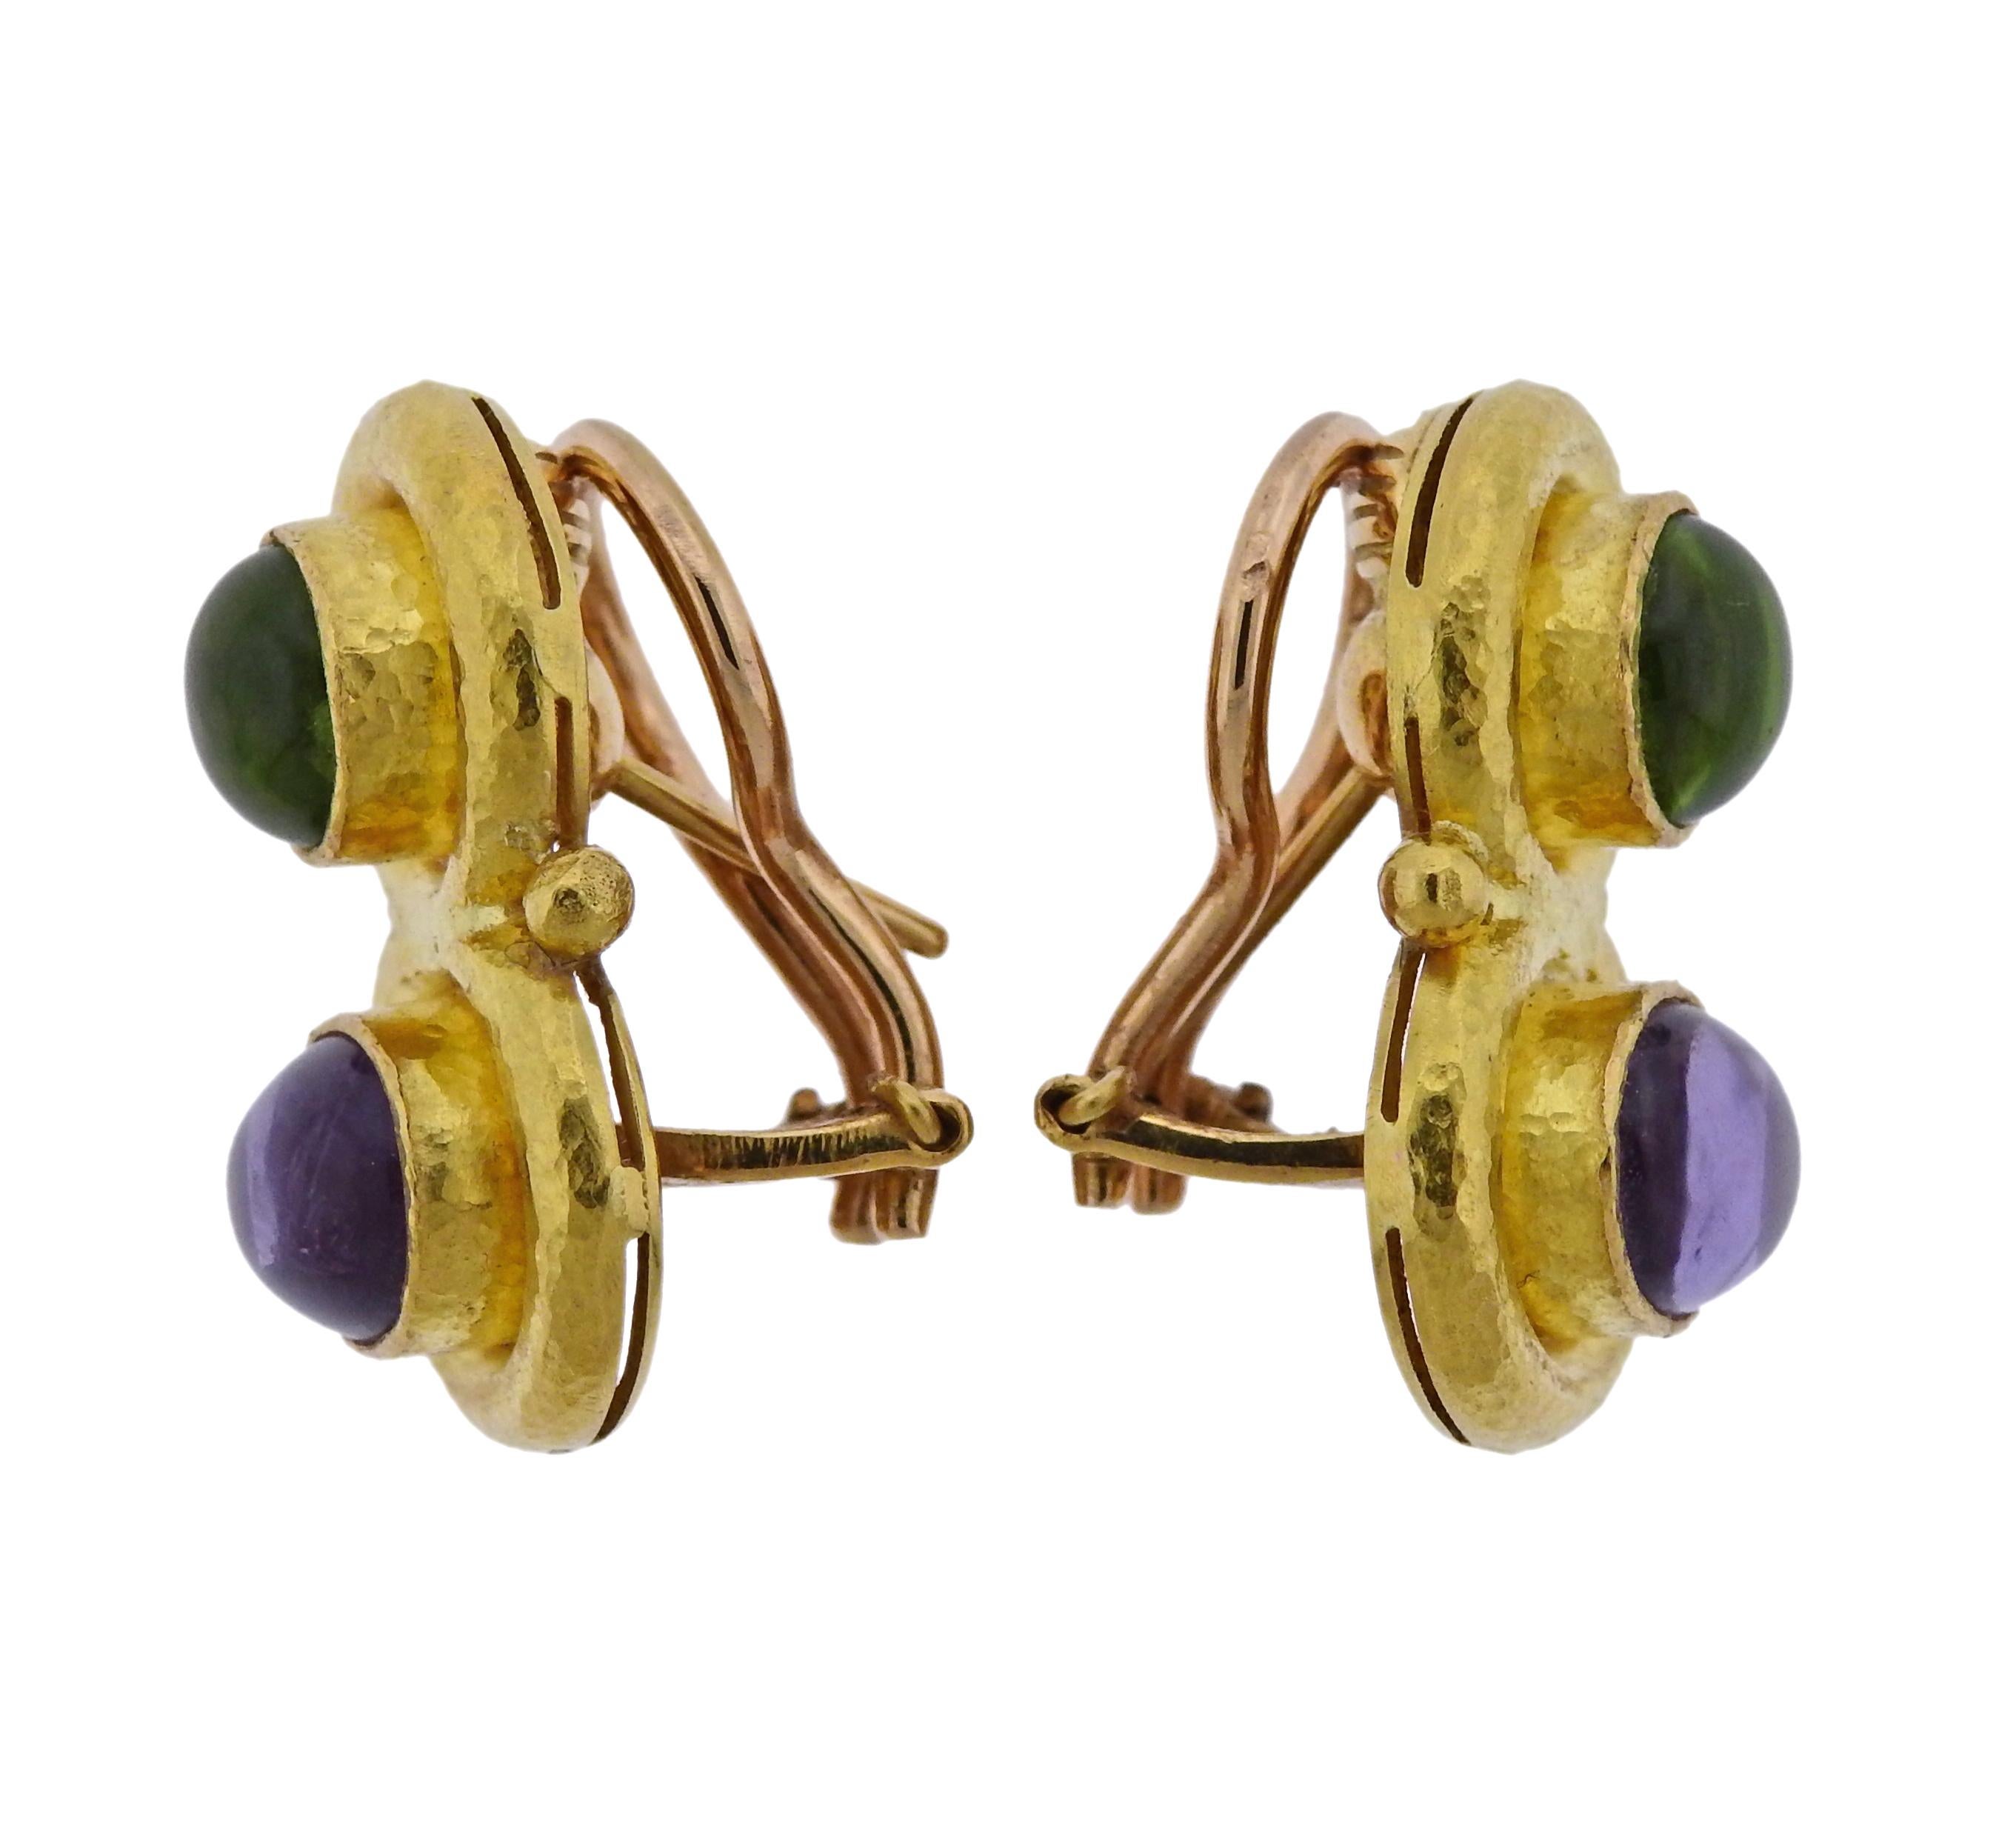 Pair of 19k gold earrings, crafted by Elizabeth Locke, set with amethyst and peridot cabochons, backed with mother of pearl.  Earrings are 23mm x 15mm, with collapsible posts, weigh 16.2 grams. Marked: E hallmark, 19k.